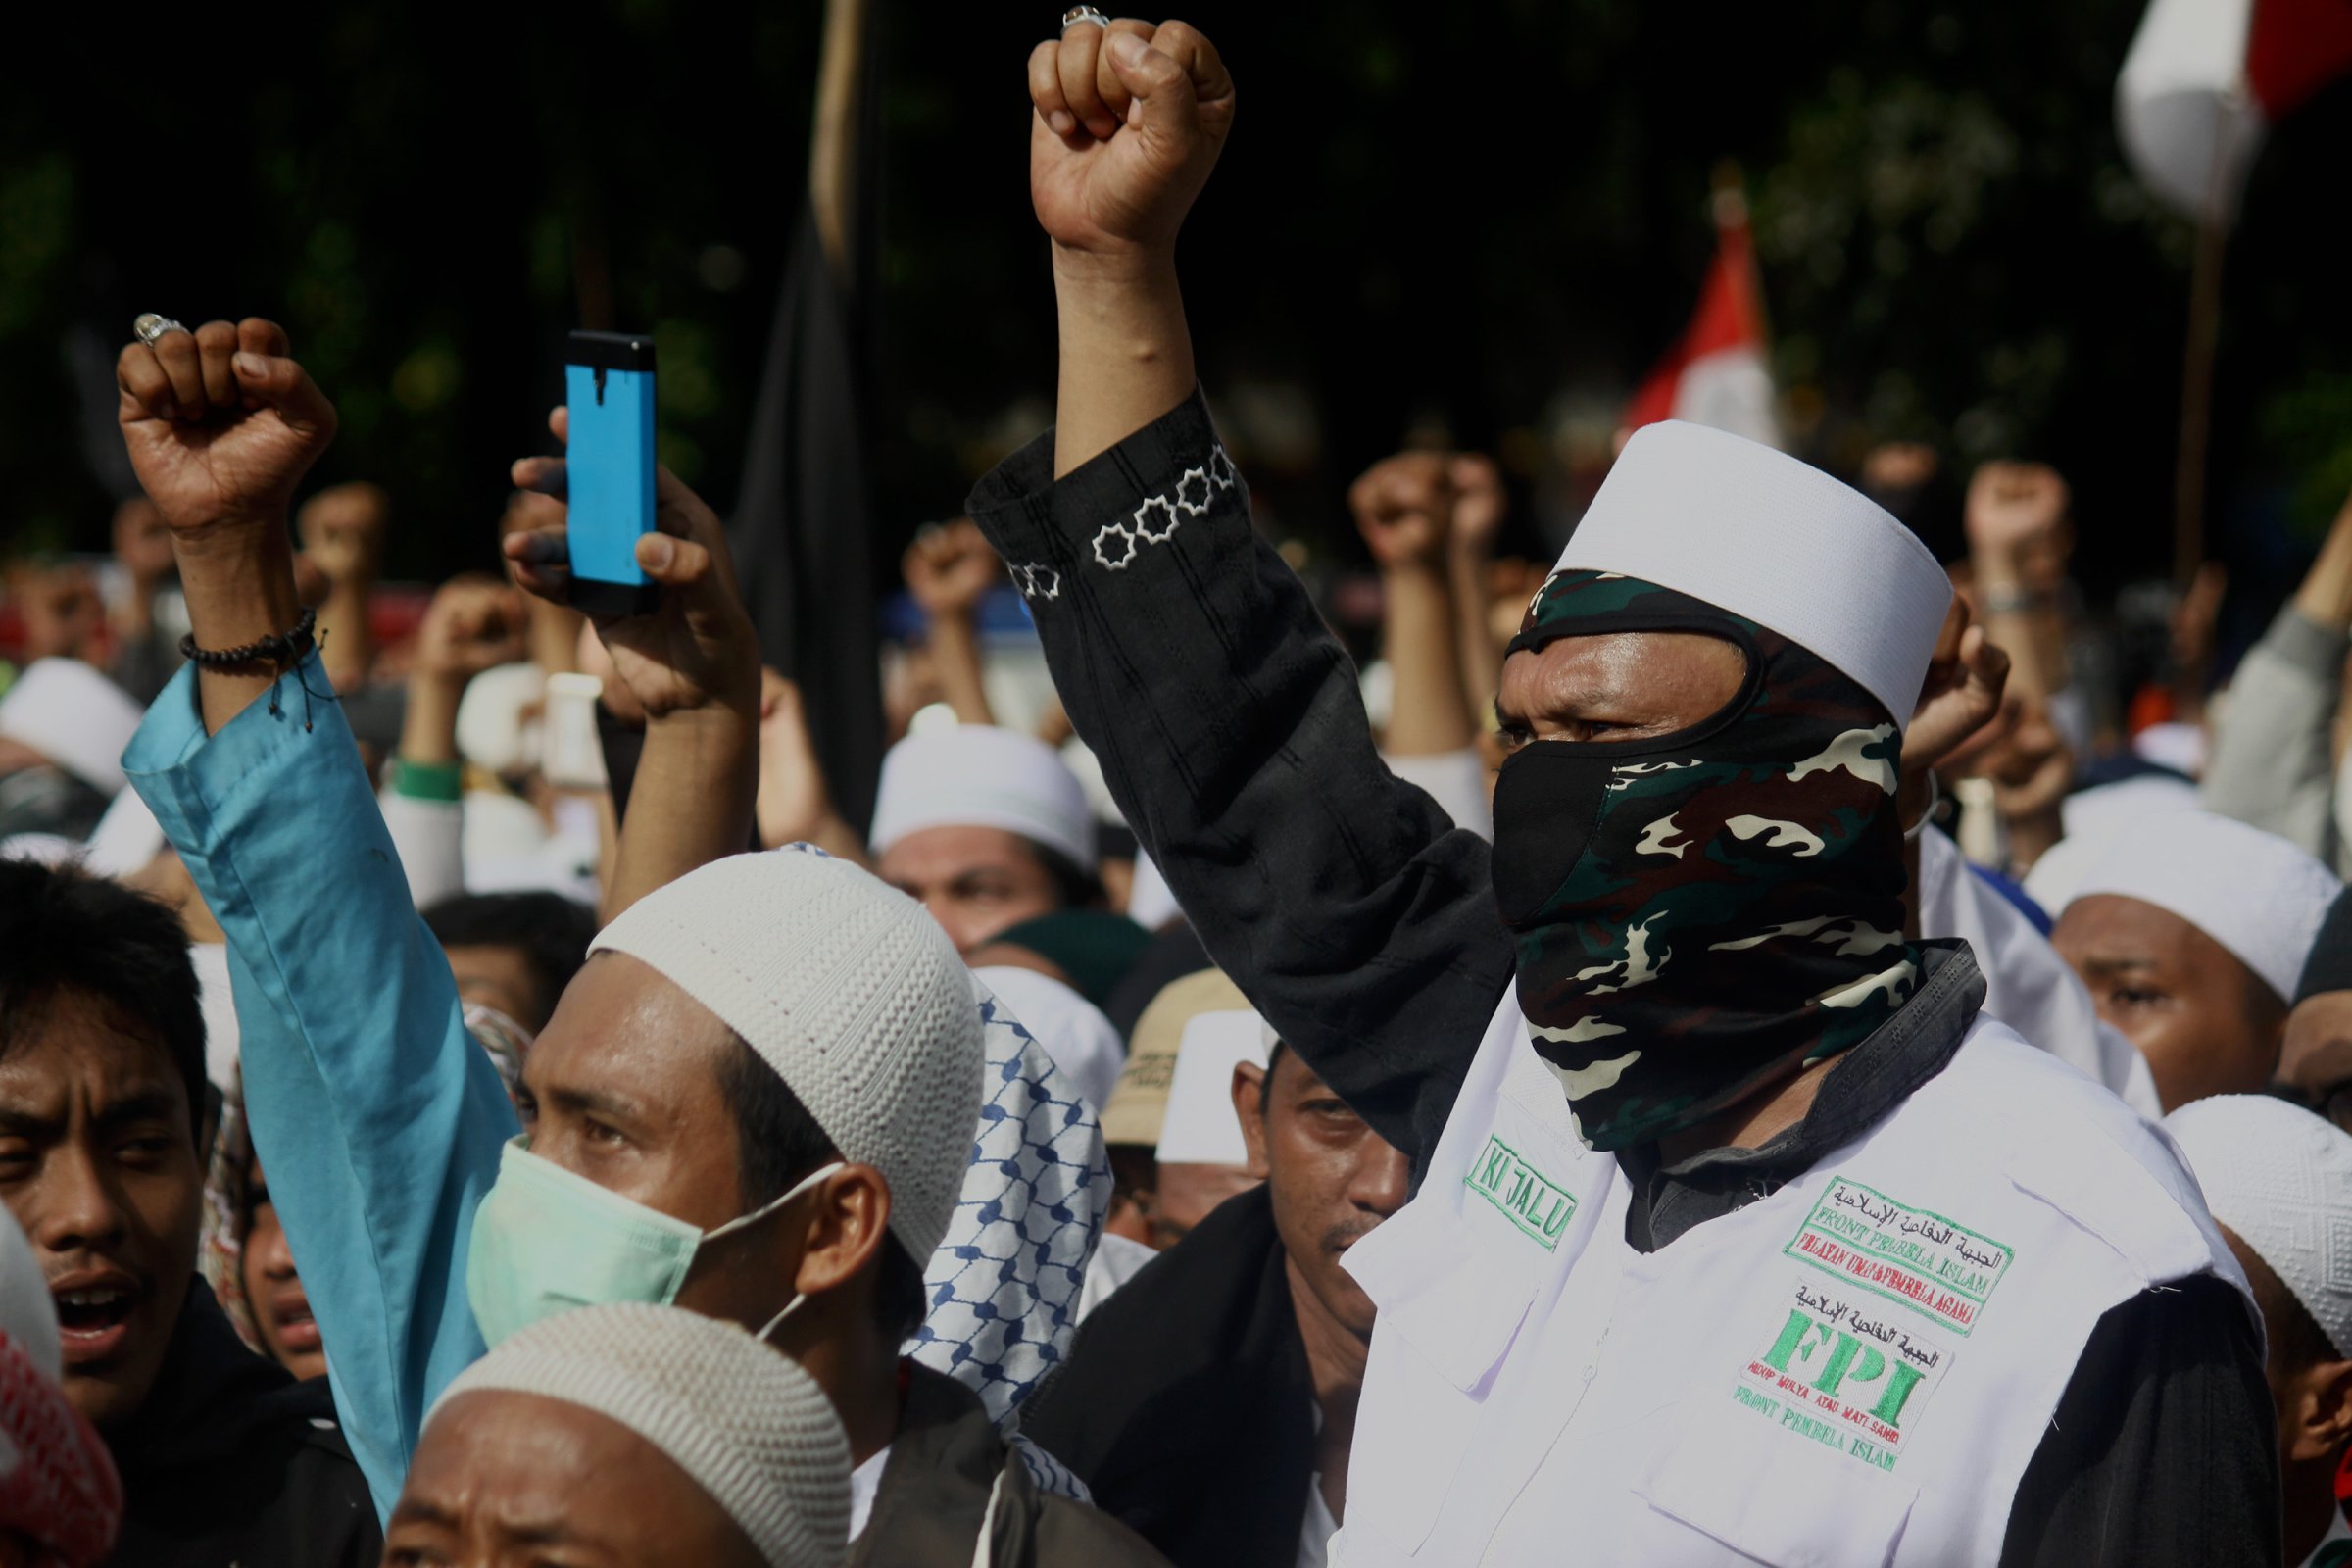 Thousands of Muslims held a demonstration in front of the